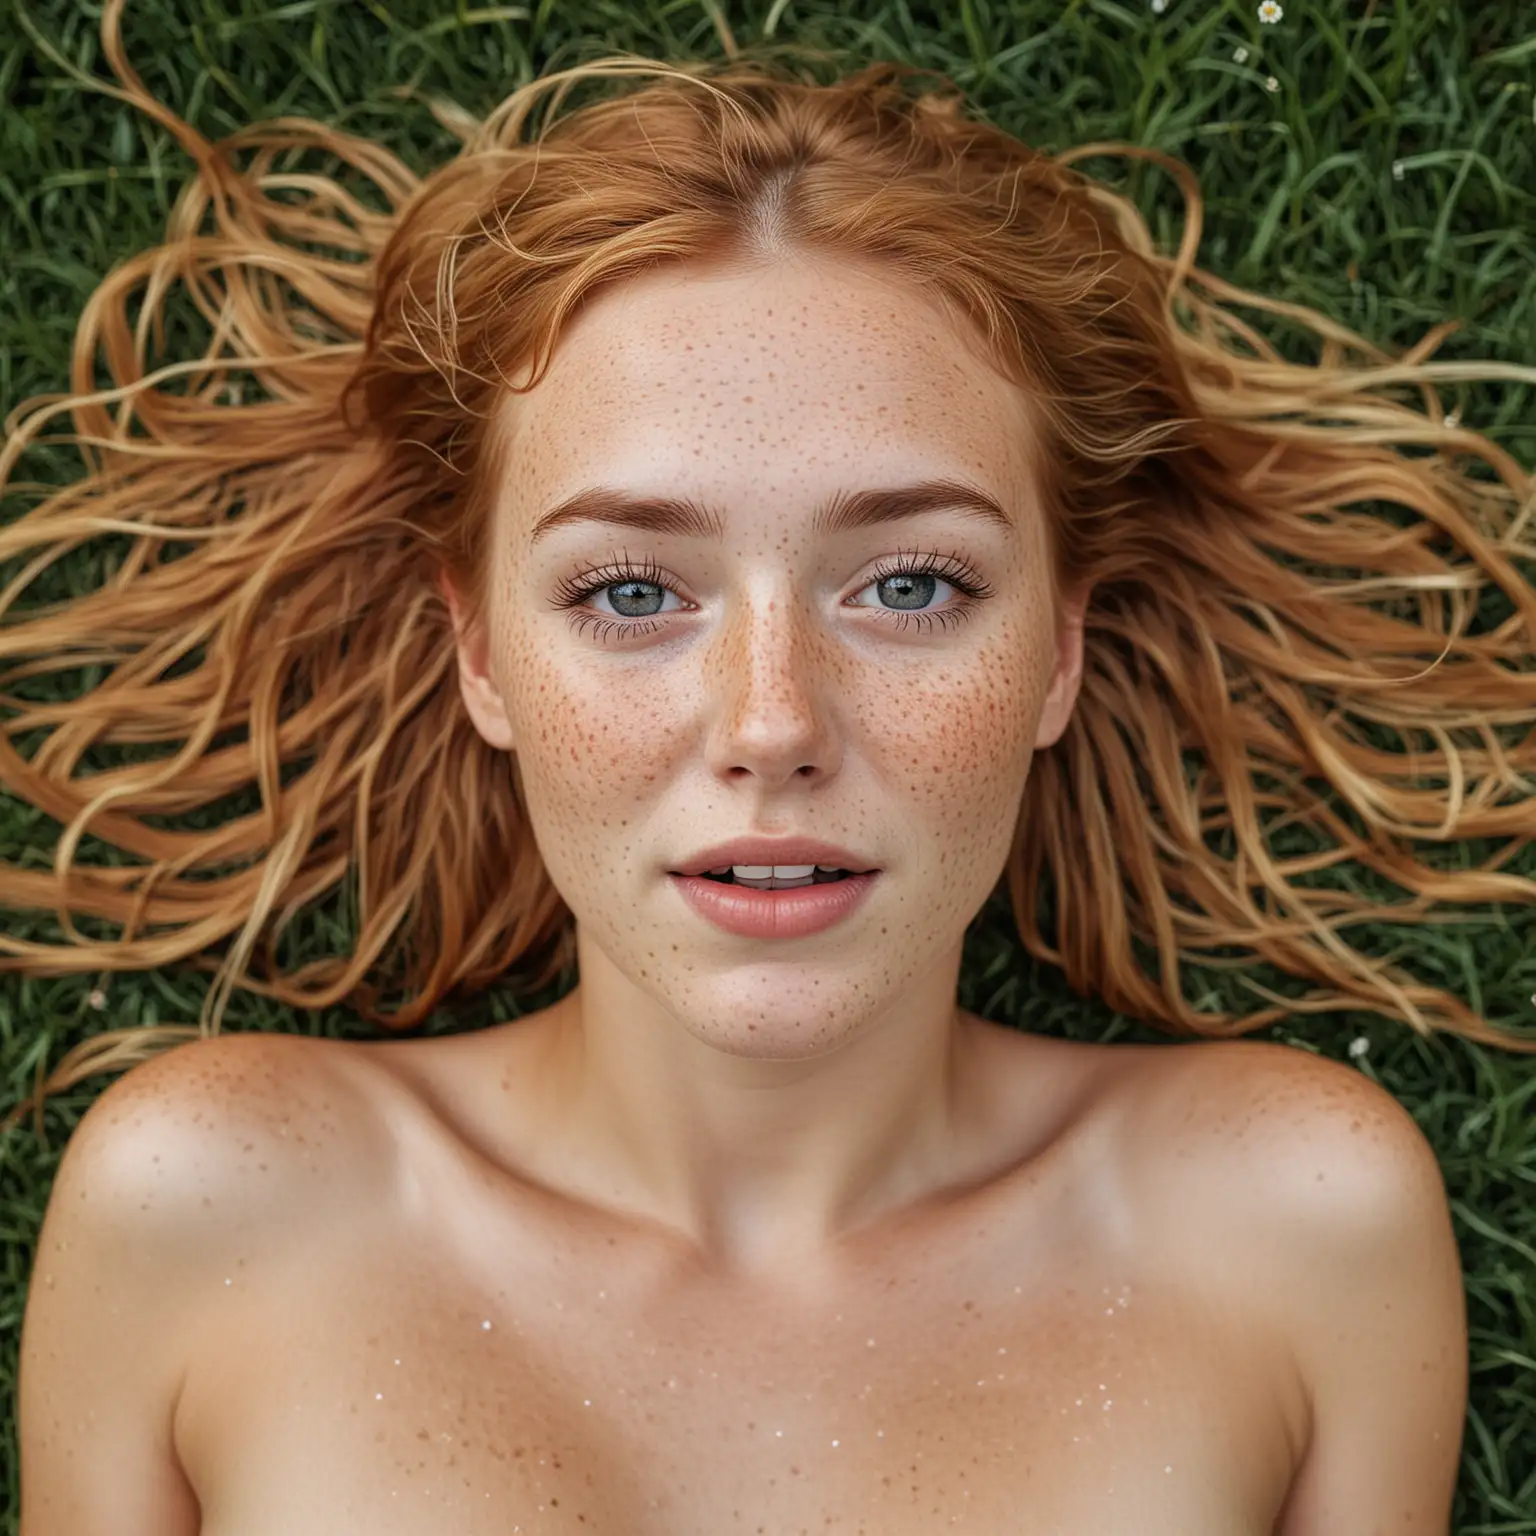 naked freckle face blonde girl laying on back in grass surprised look on her face